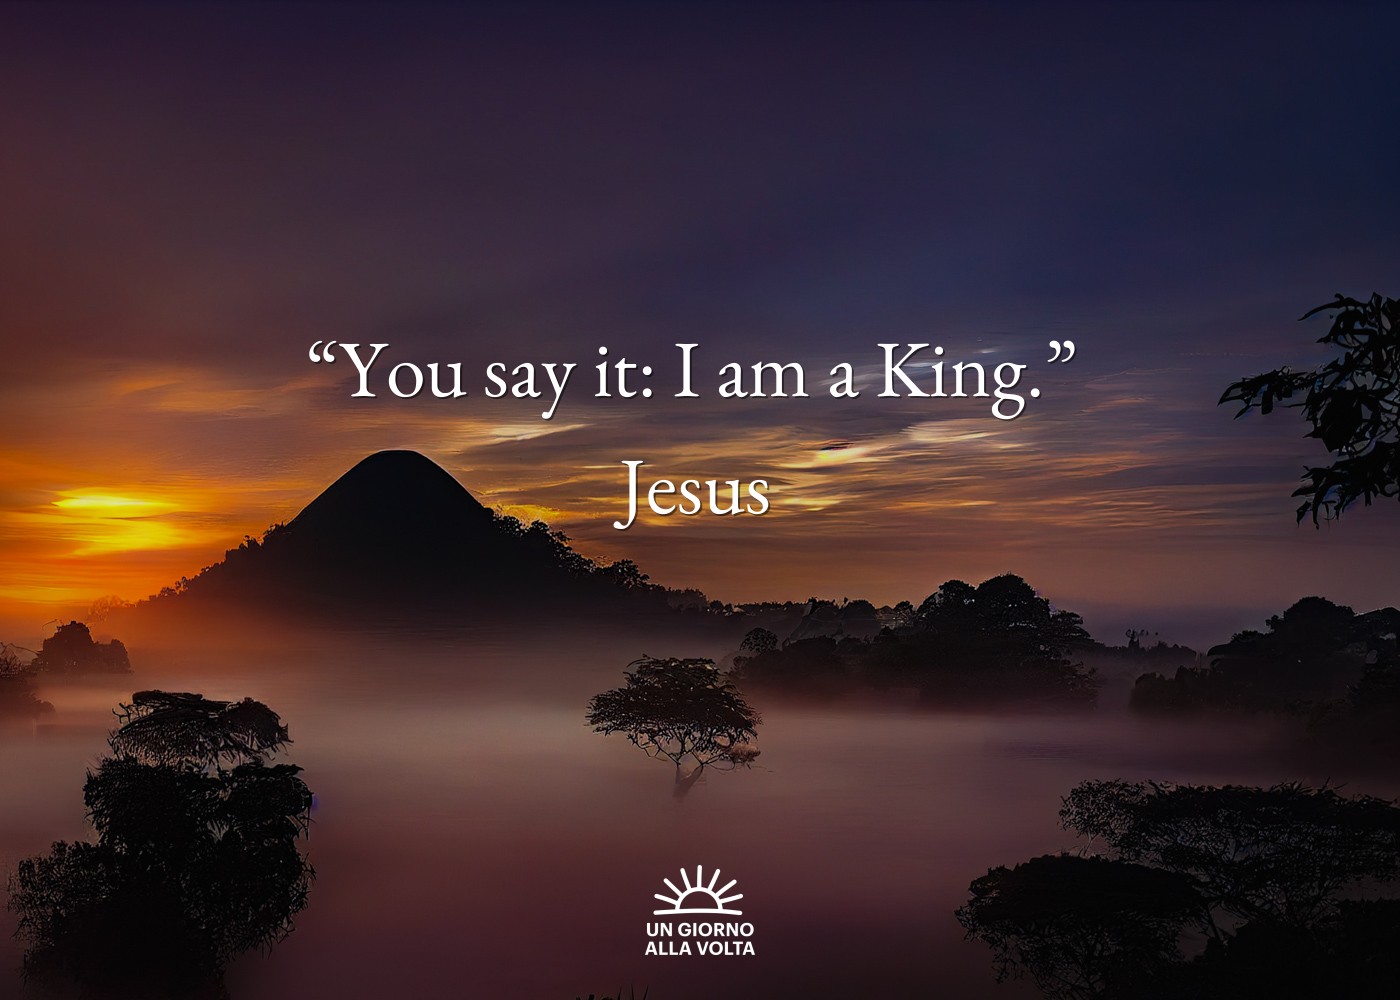 “You say it: I am a King.” 
Jesus
